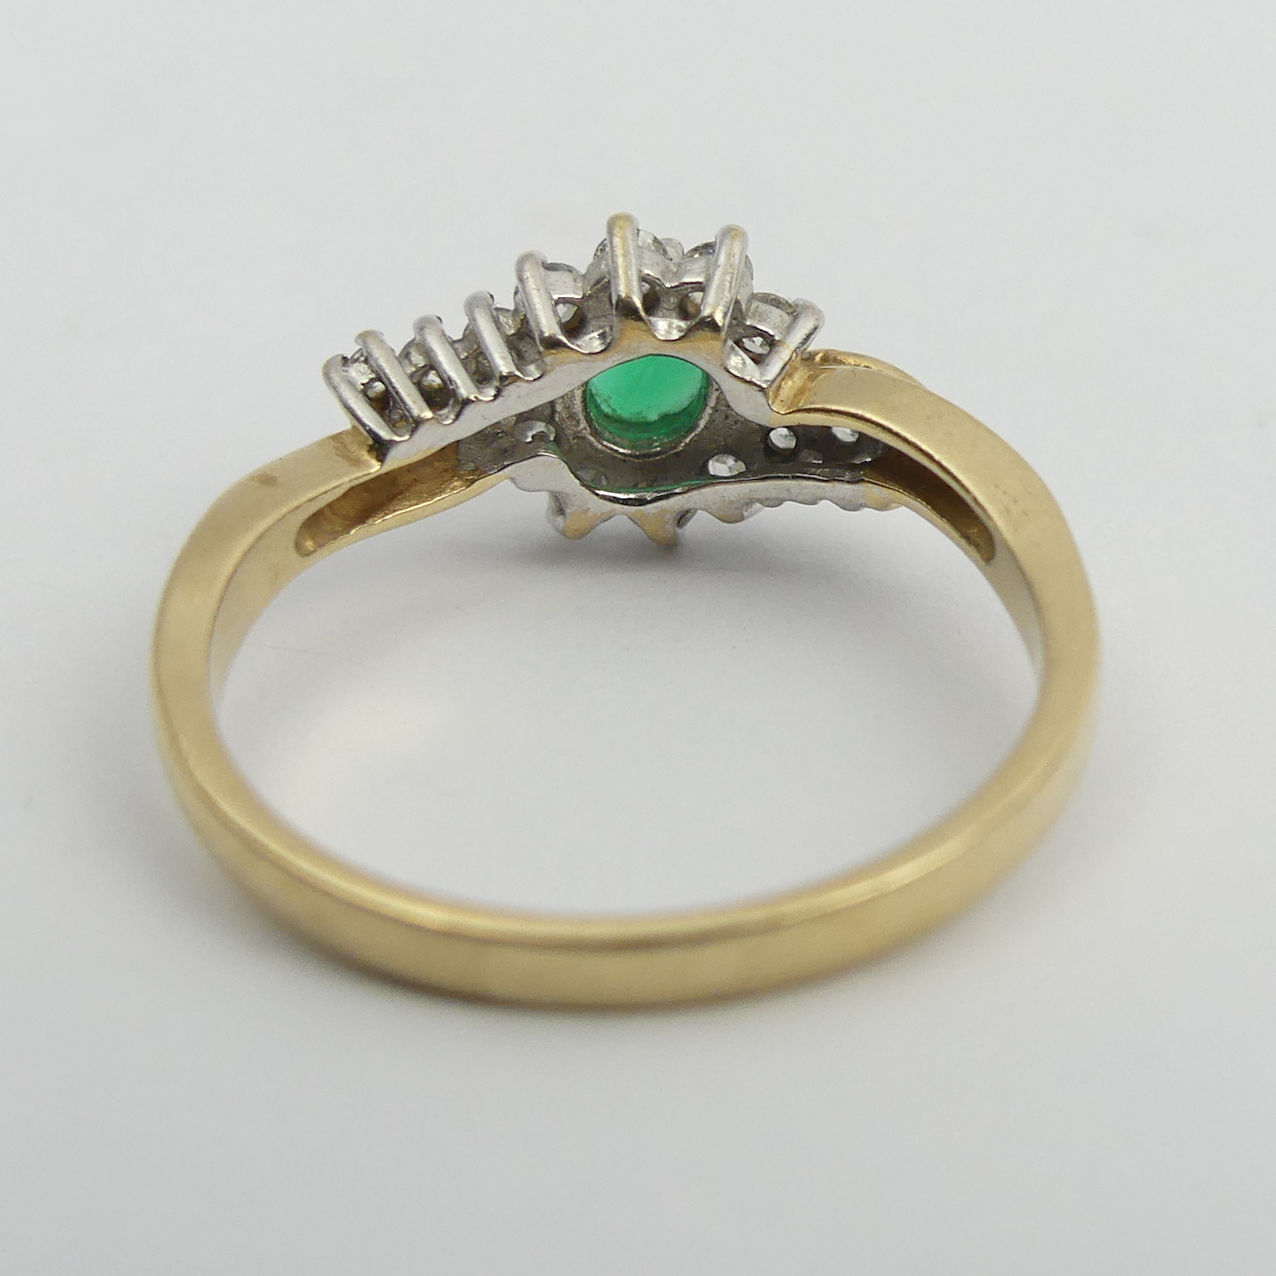 9ct gold green and white stone ring, 2.6 grams. Size P, 9 mm wide. UK Postage £12. - Image 5 of 6